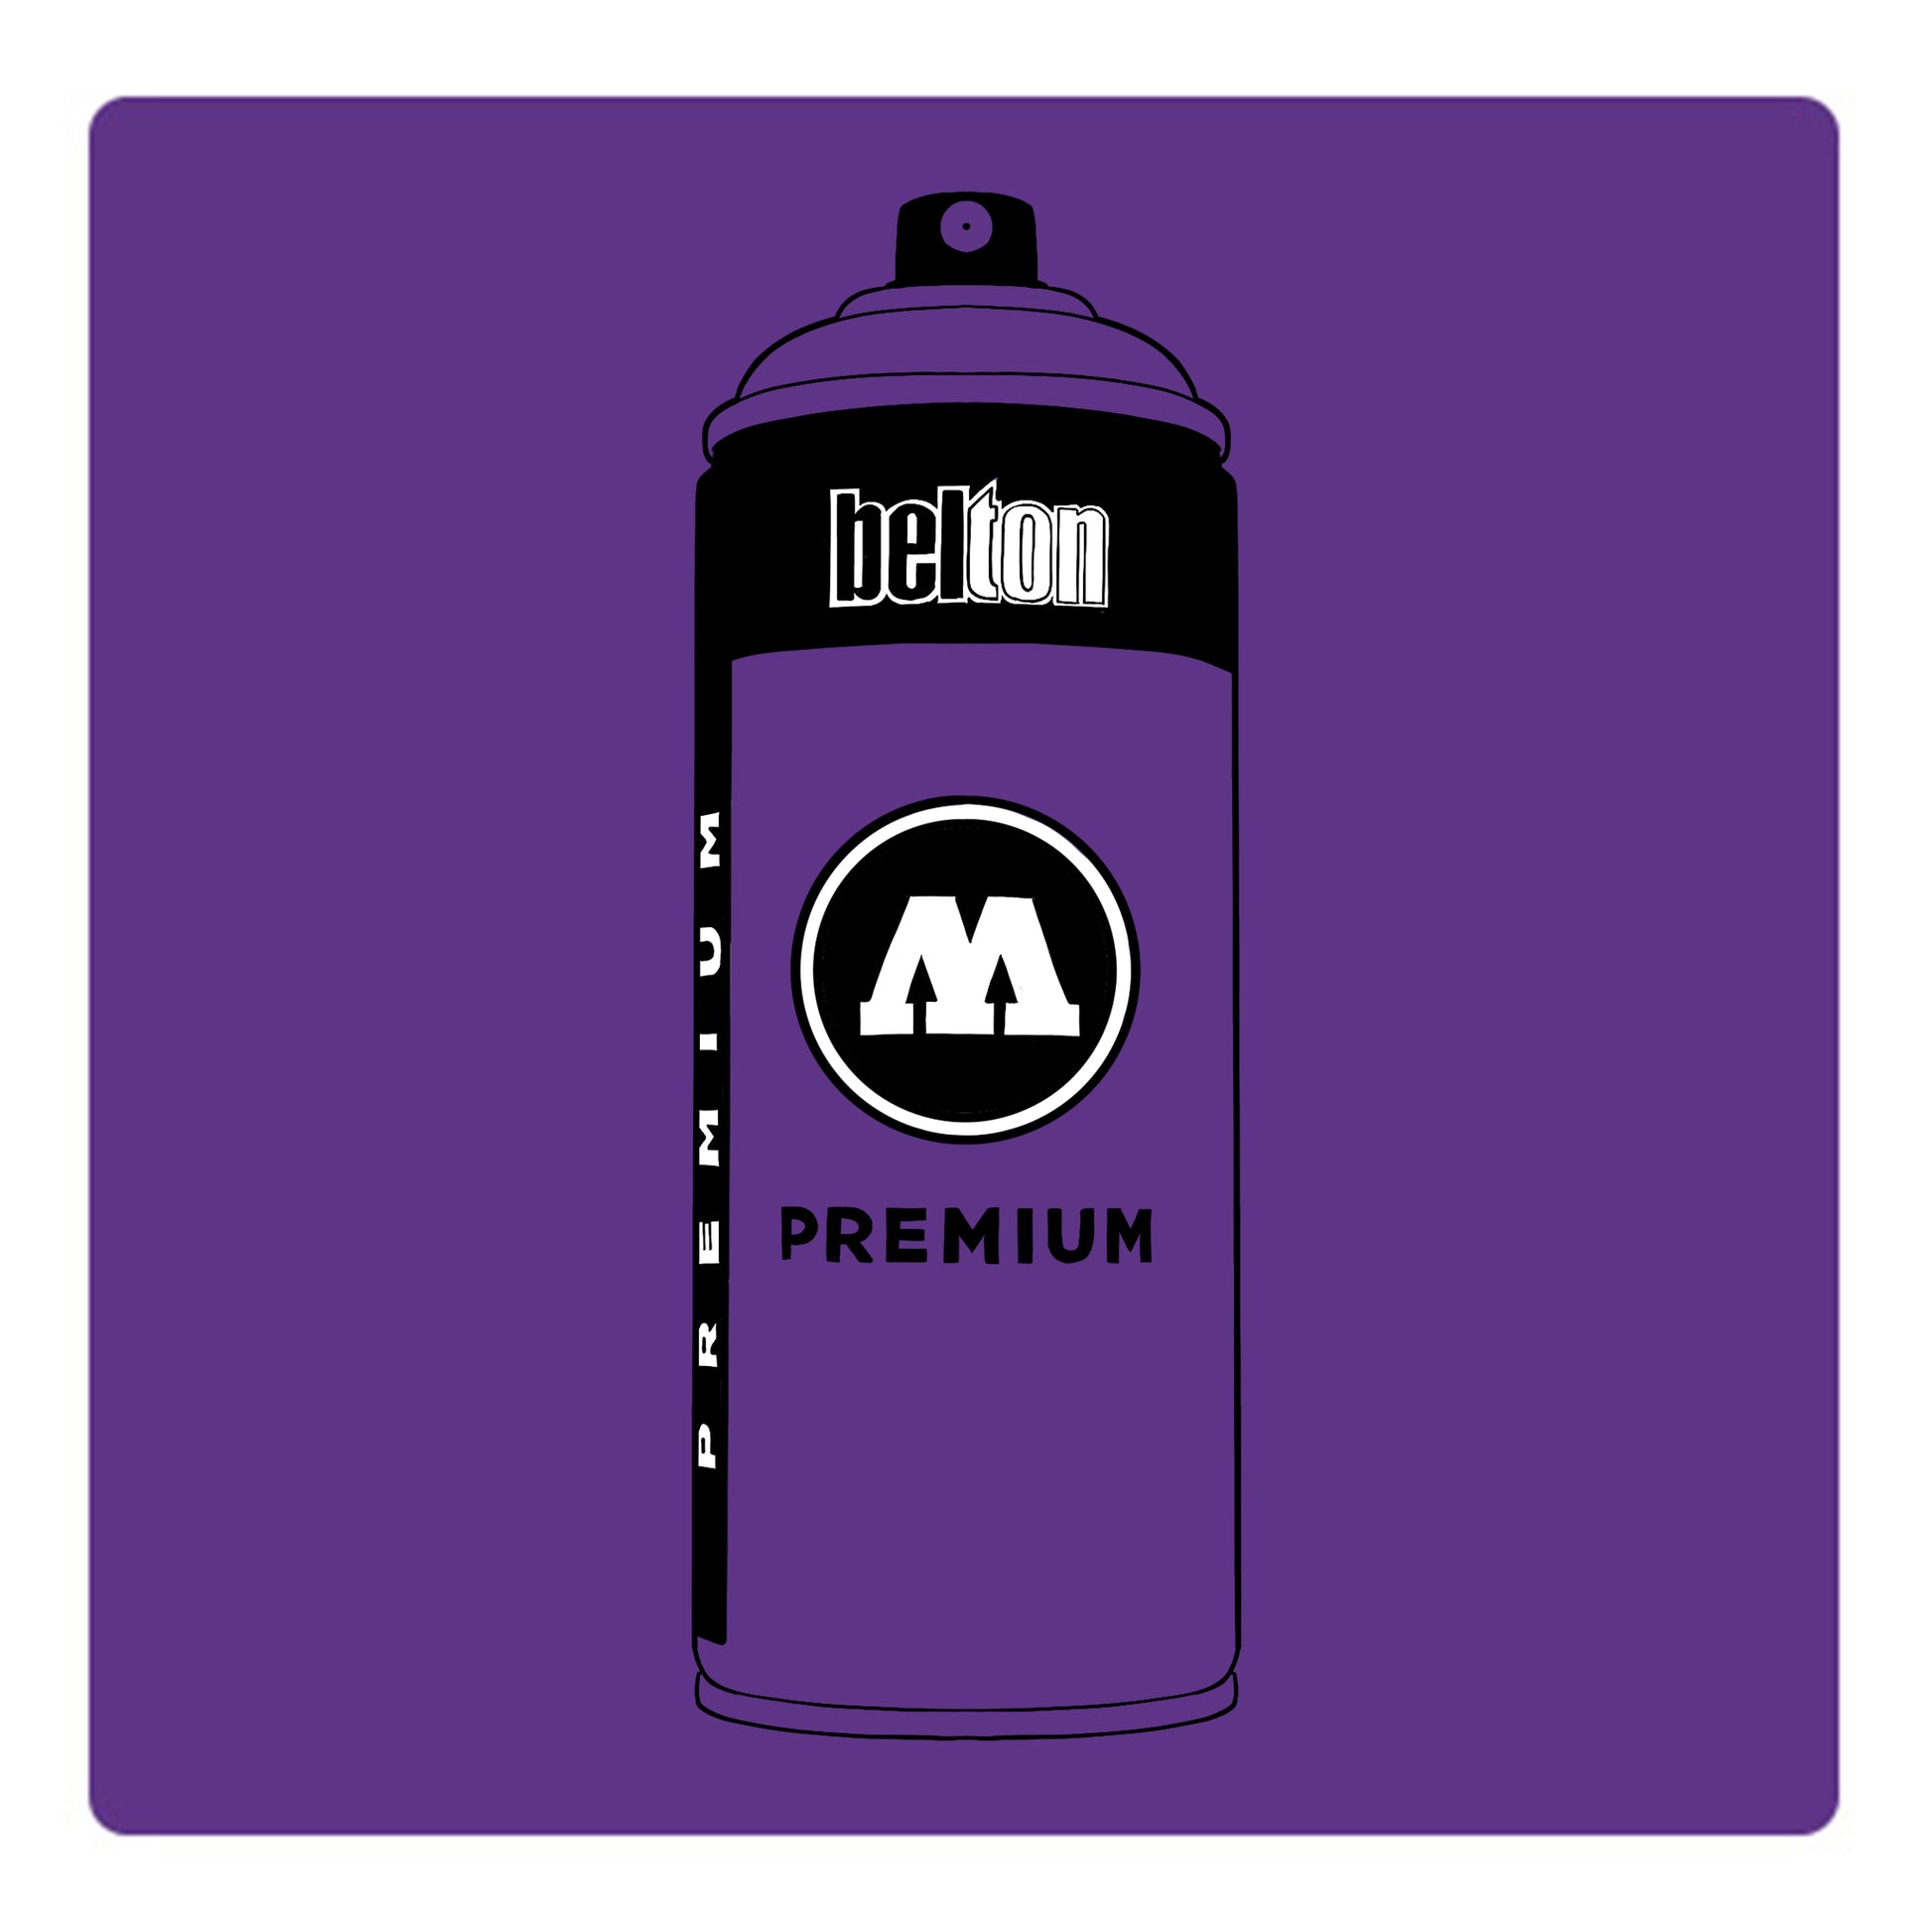 A black outline drawing of a light  purple spray paint can with the words "belton","premium" and the letter"M" written on the face in black and white font. The background is a color swatch of the same light purple with a white border.